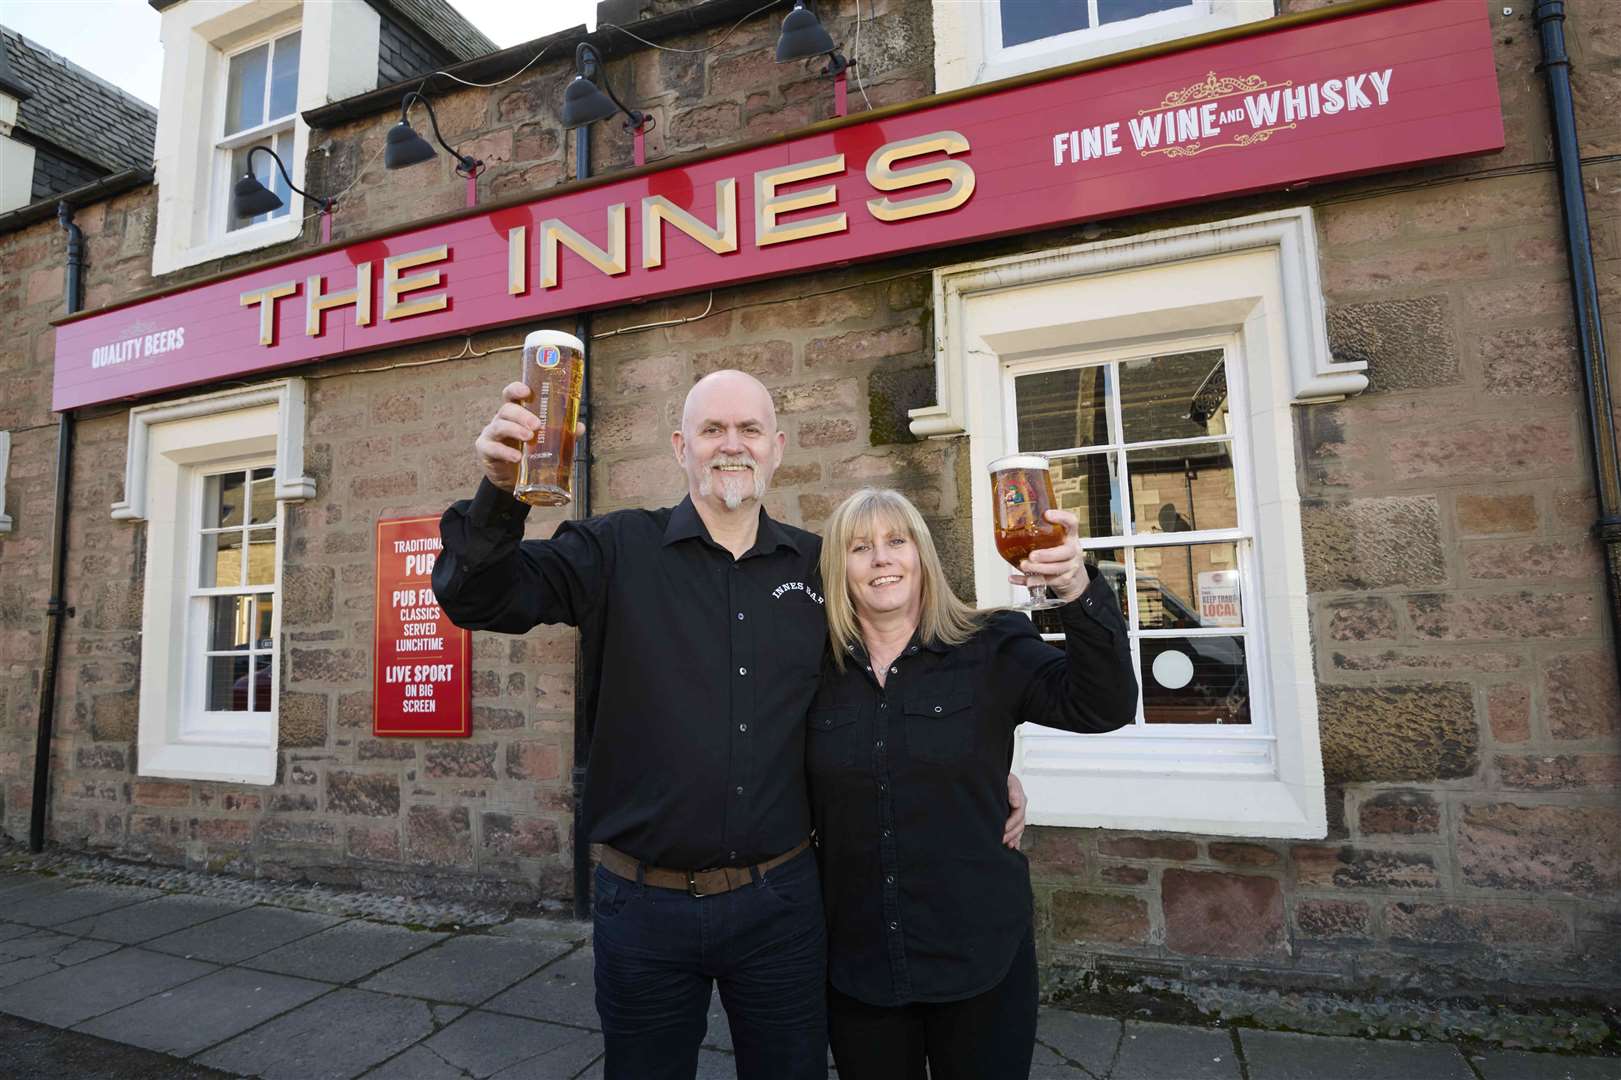 Craig MacLeod and Collette MacPherson outside The Innes Bar in Inverness.